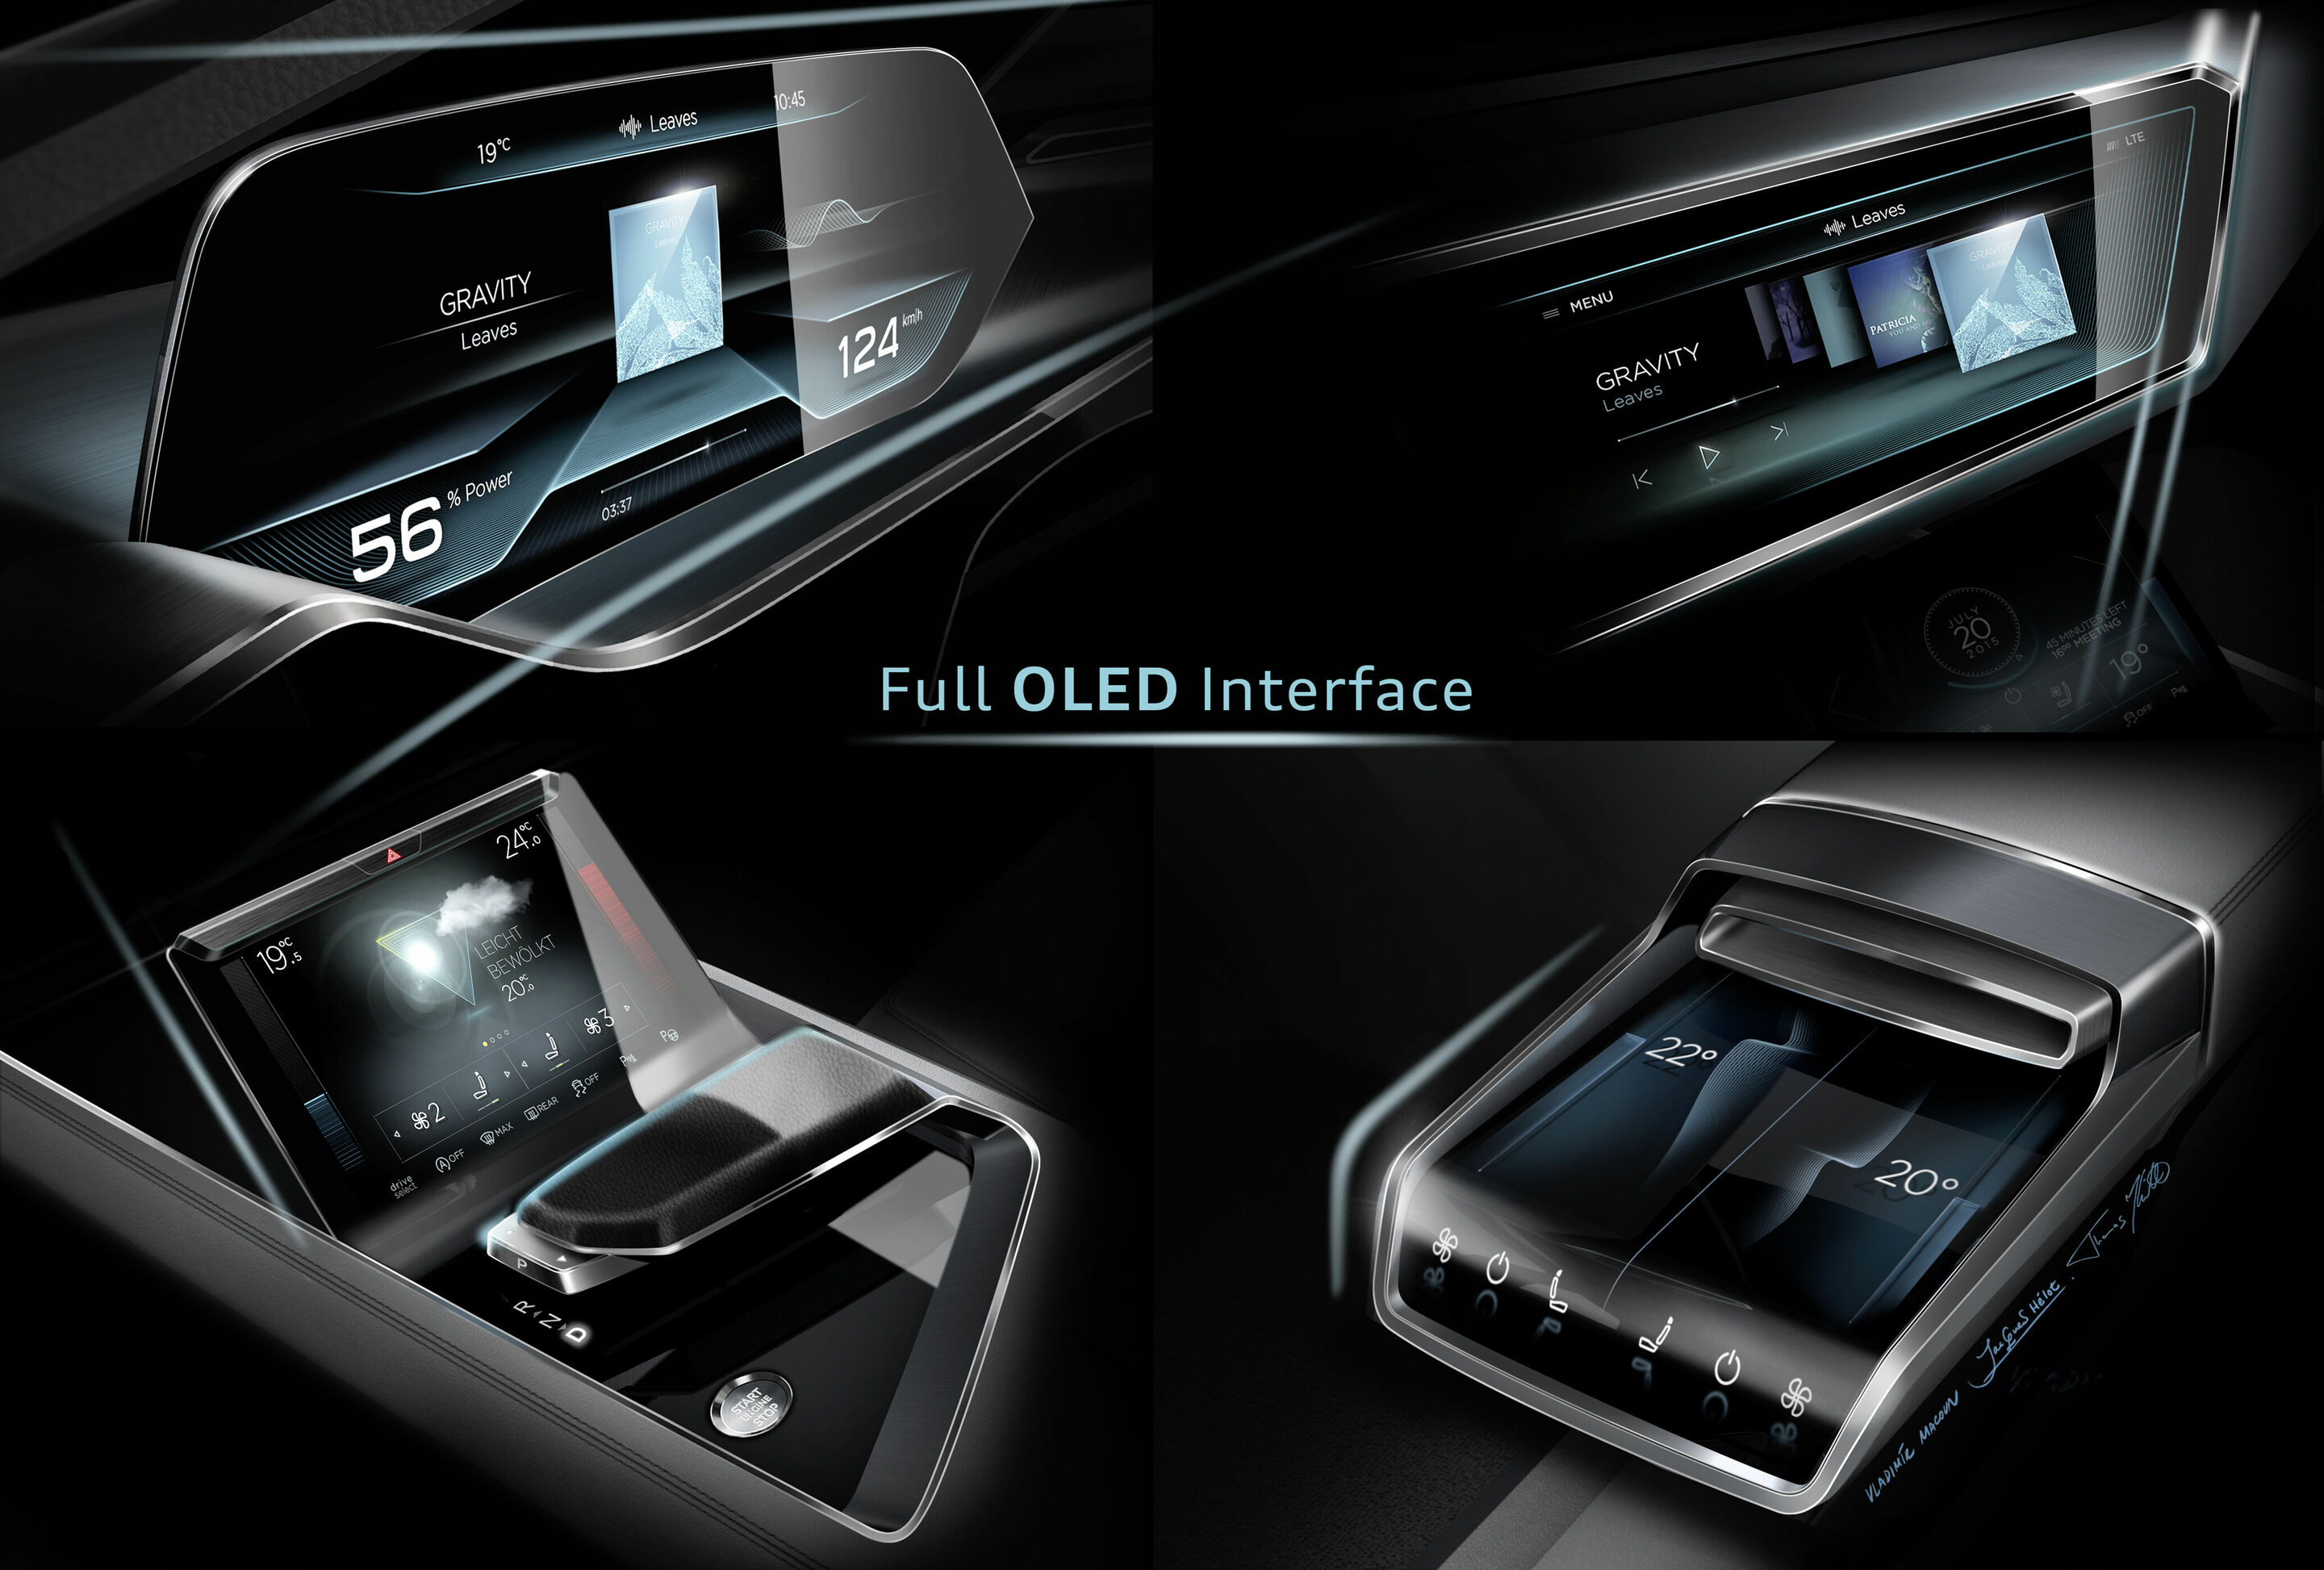 Audi e-tron quattro concept – OLED-based operating and display concept